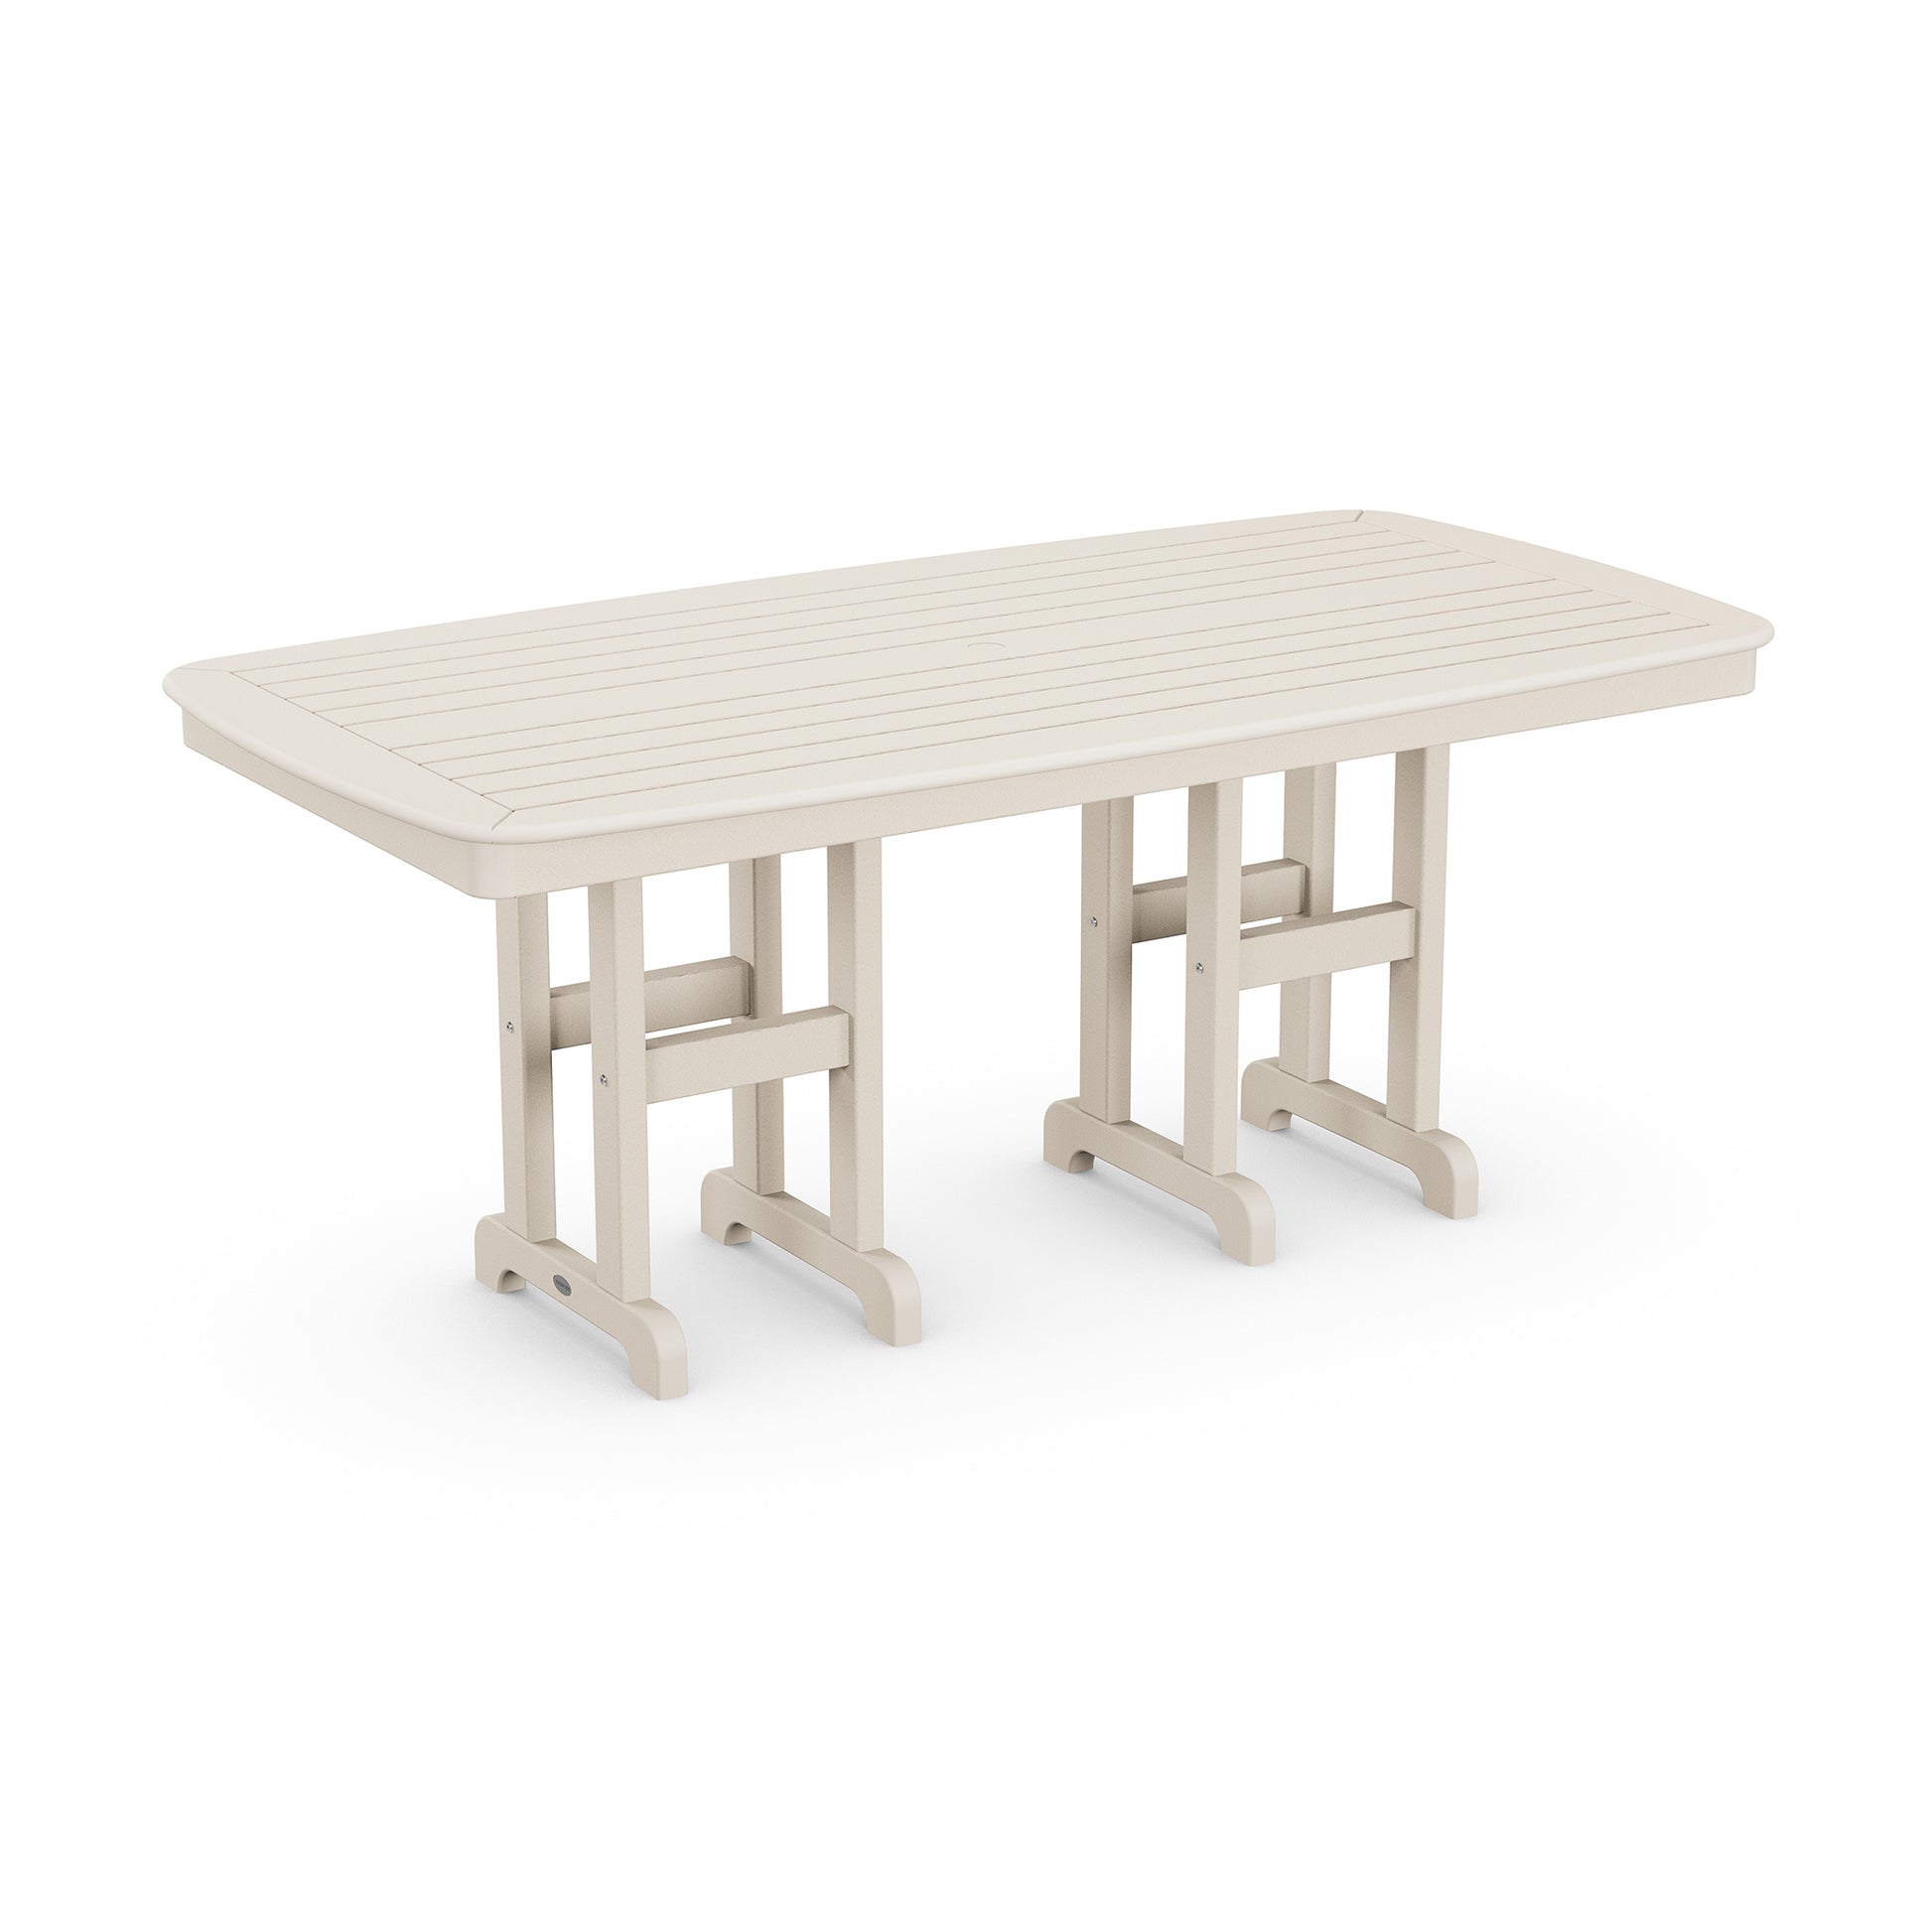 A light beige POLYWOOD Nautical 37" x 72" Rectangular Dining Table arranged in a horizontal orientation on a white background, featuring a slatted top design and sturdy legs.